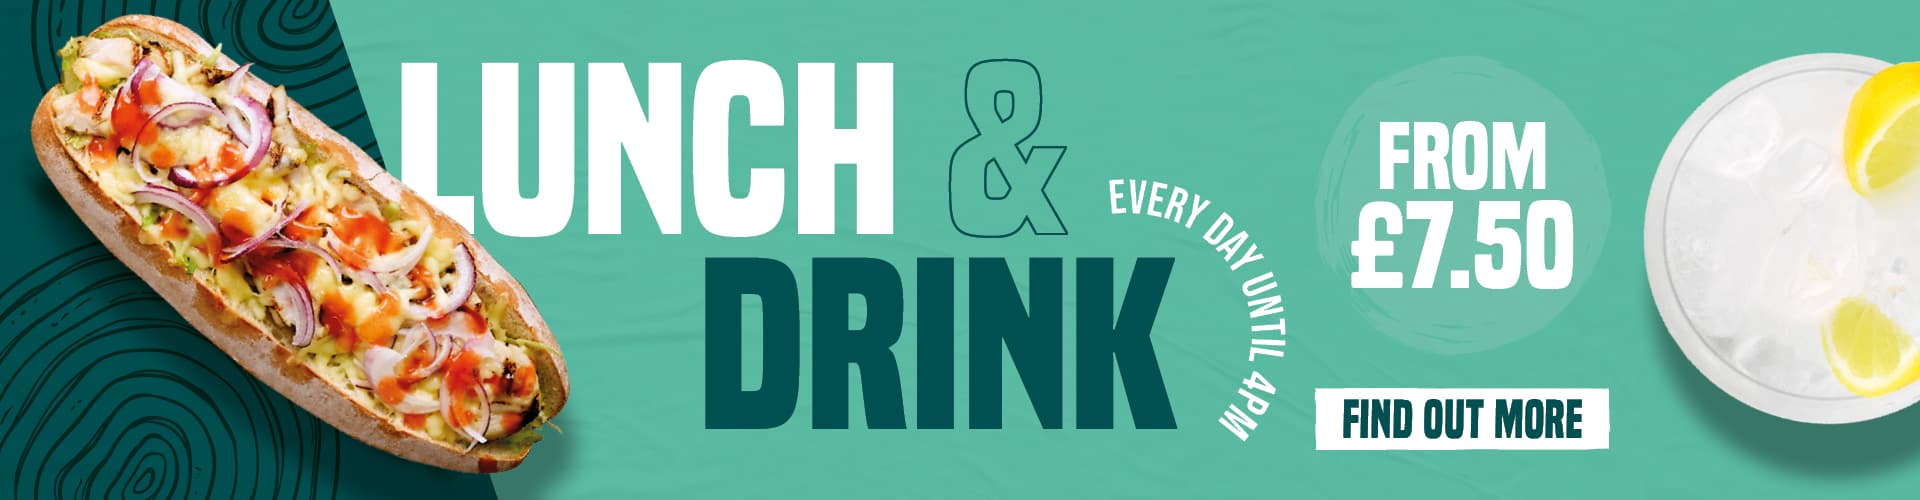 Lunch & Drink, Every Day Until 4pm, From £7.50. Find Out More.